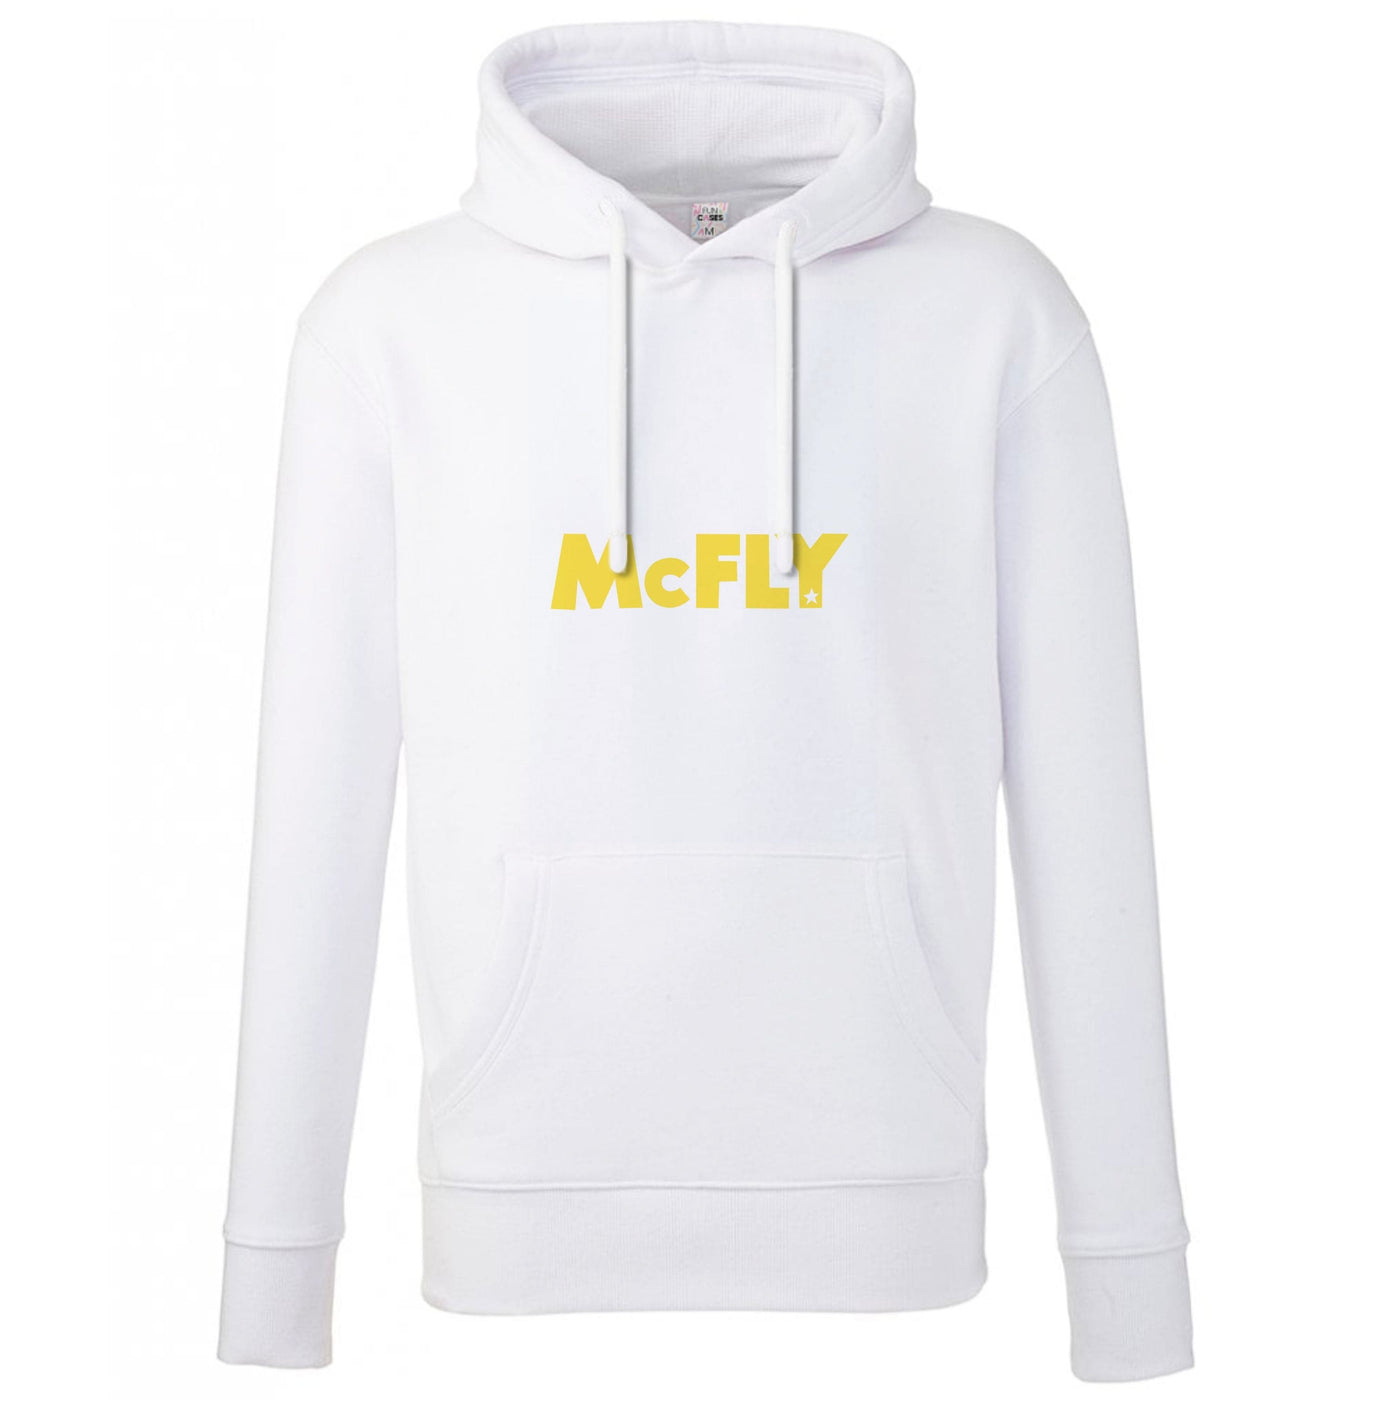 Blue And Yelllow - McFly Hoodie